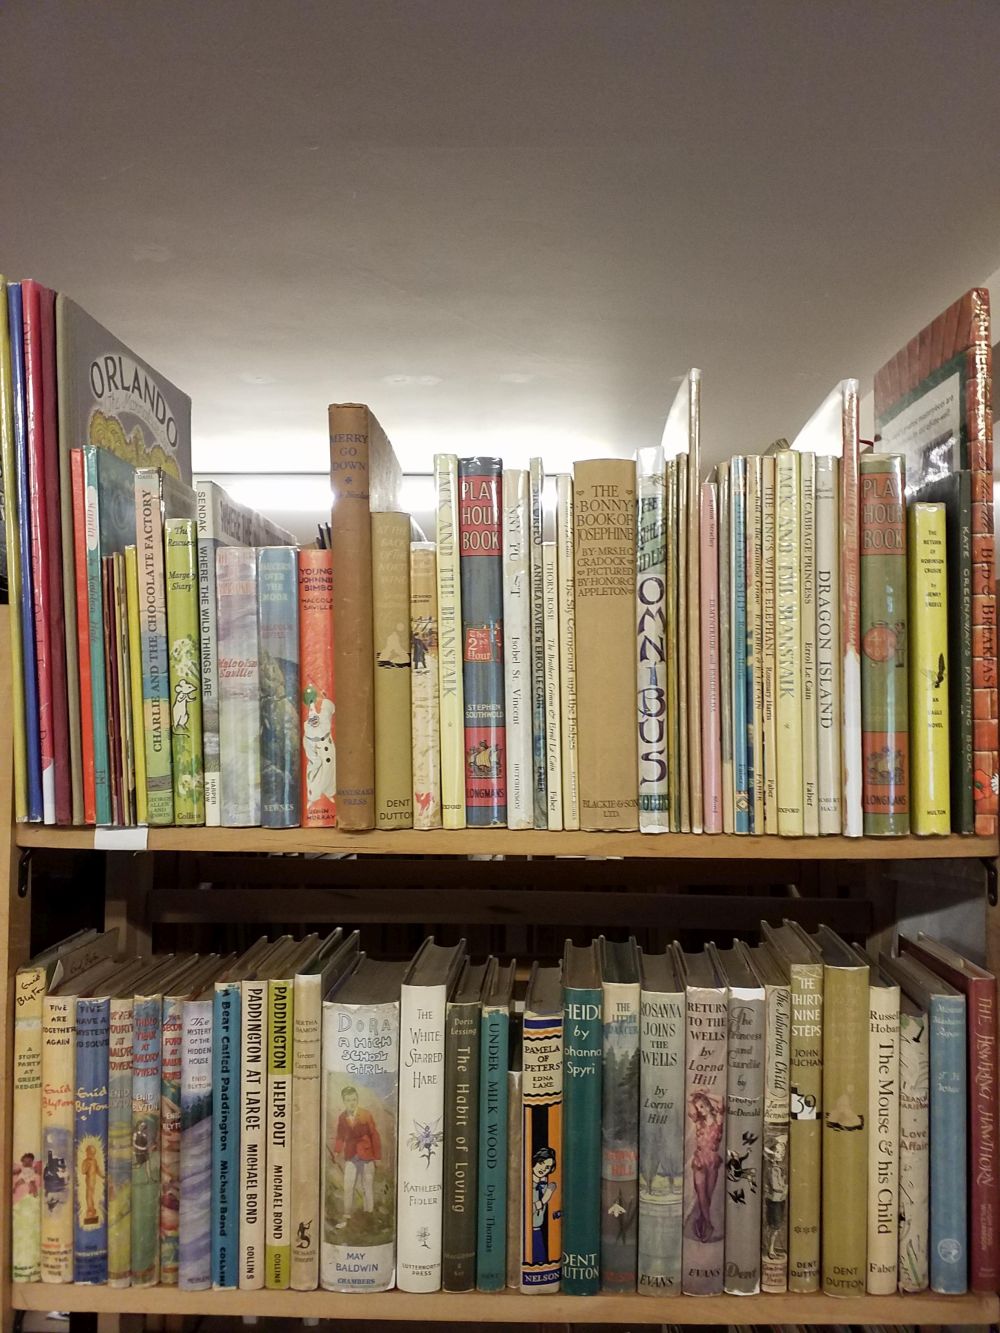 Juvenile Literature. A large collection of early to mid-20th century juvenile literature